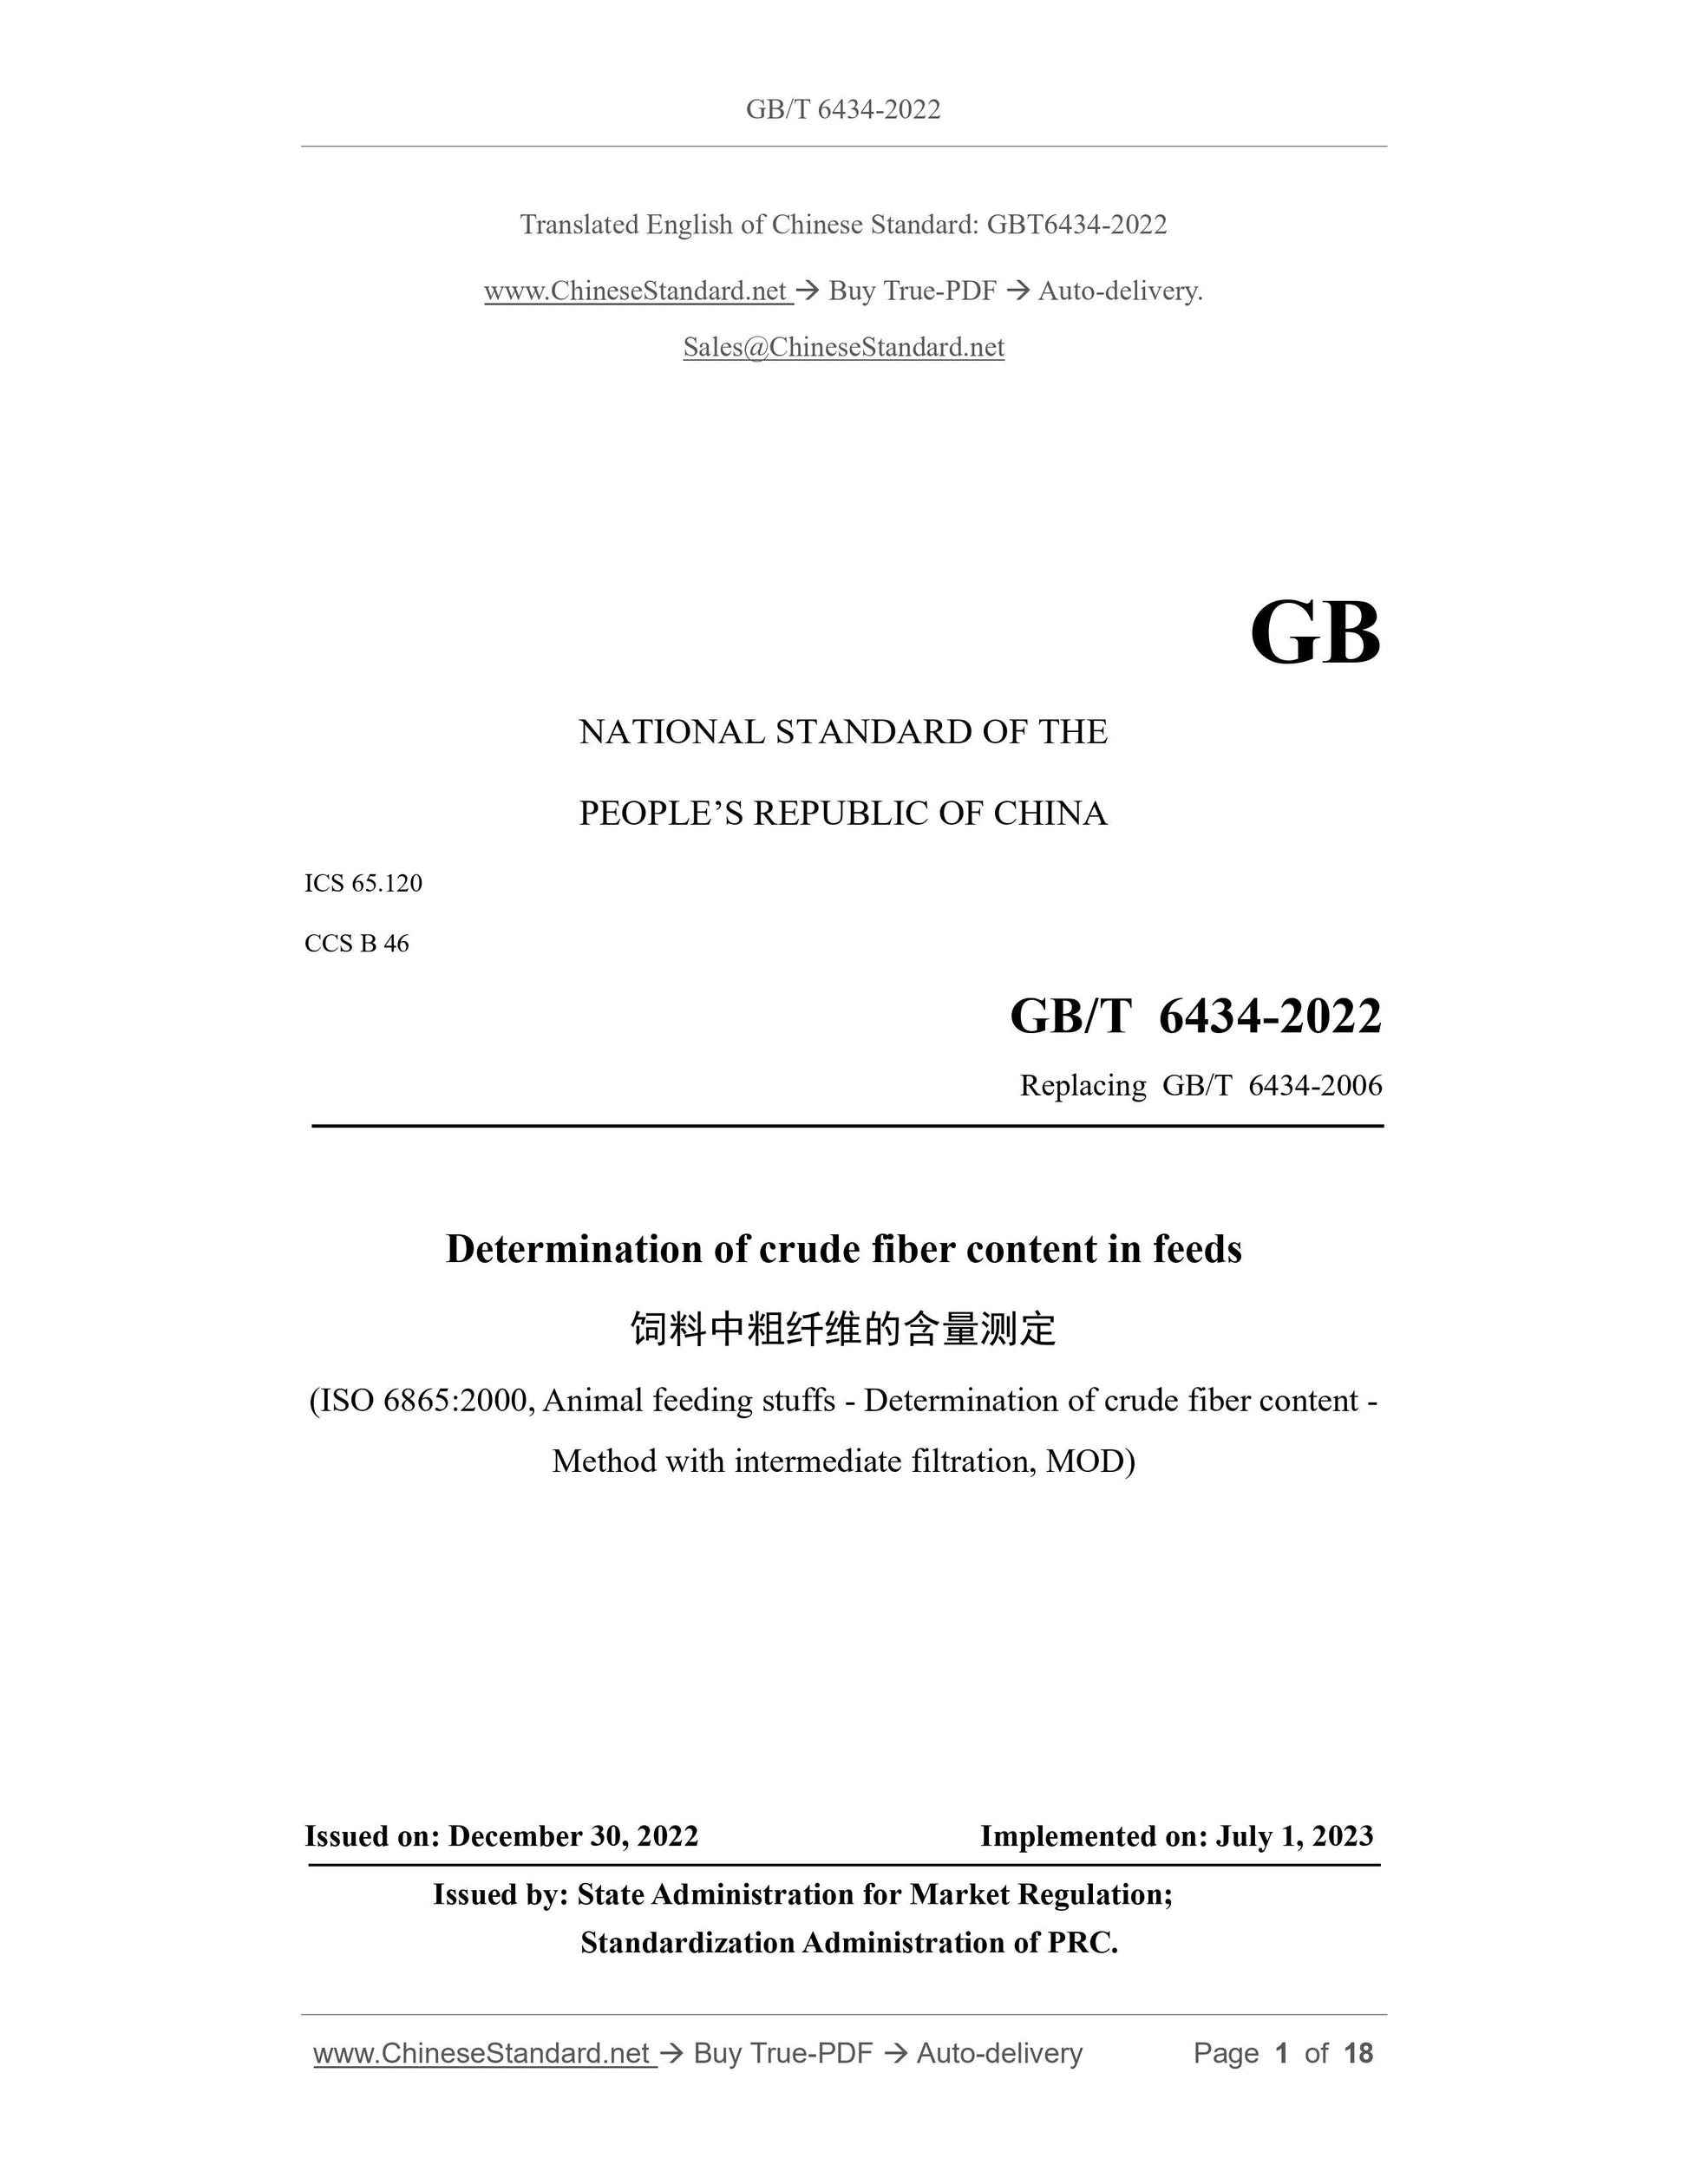 GB/T 6434-2022 Page 1